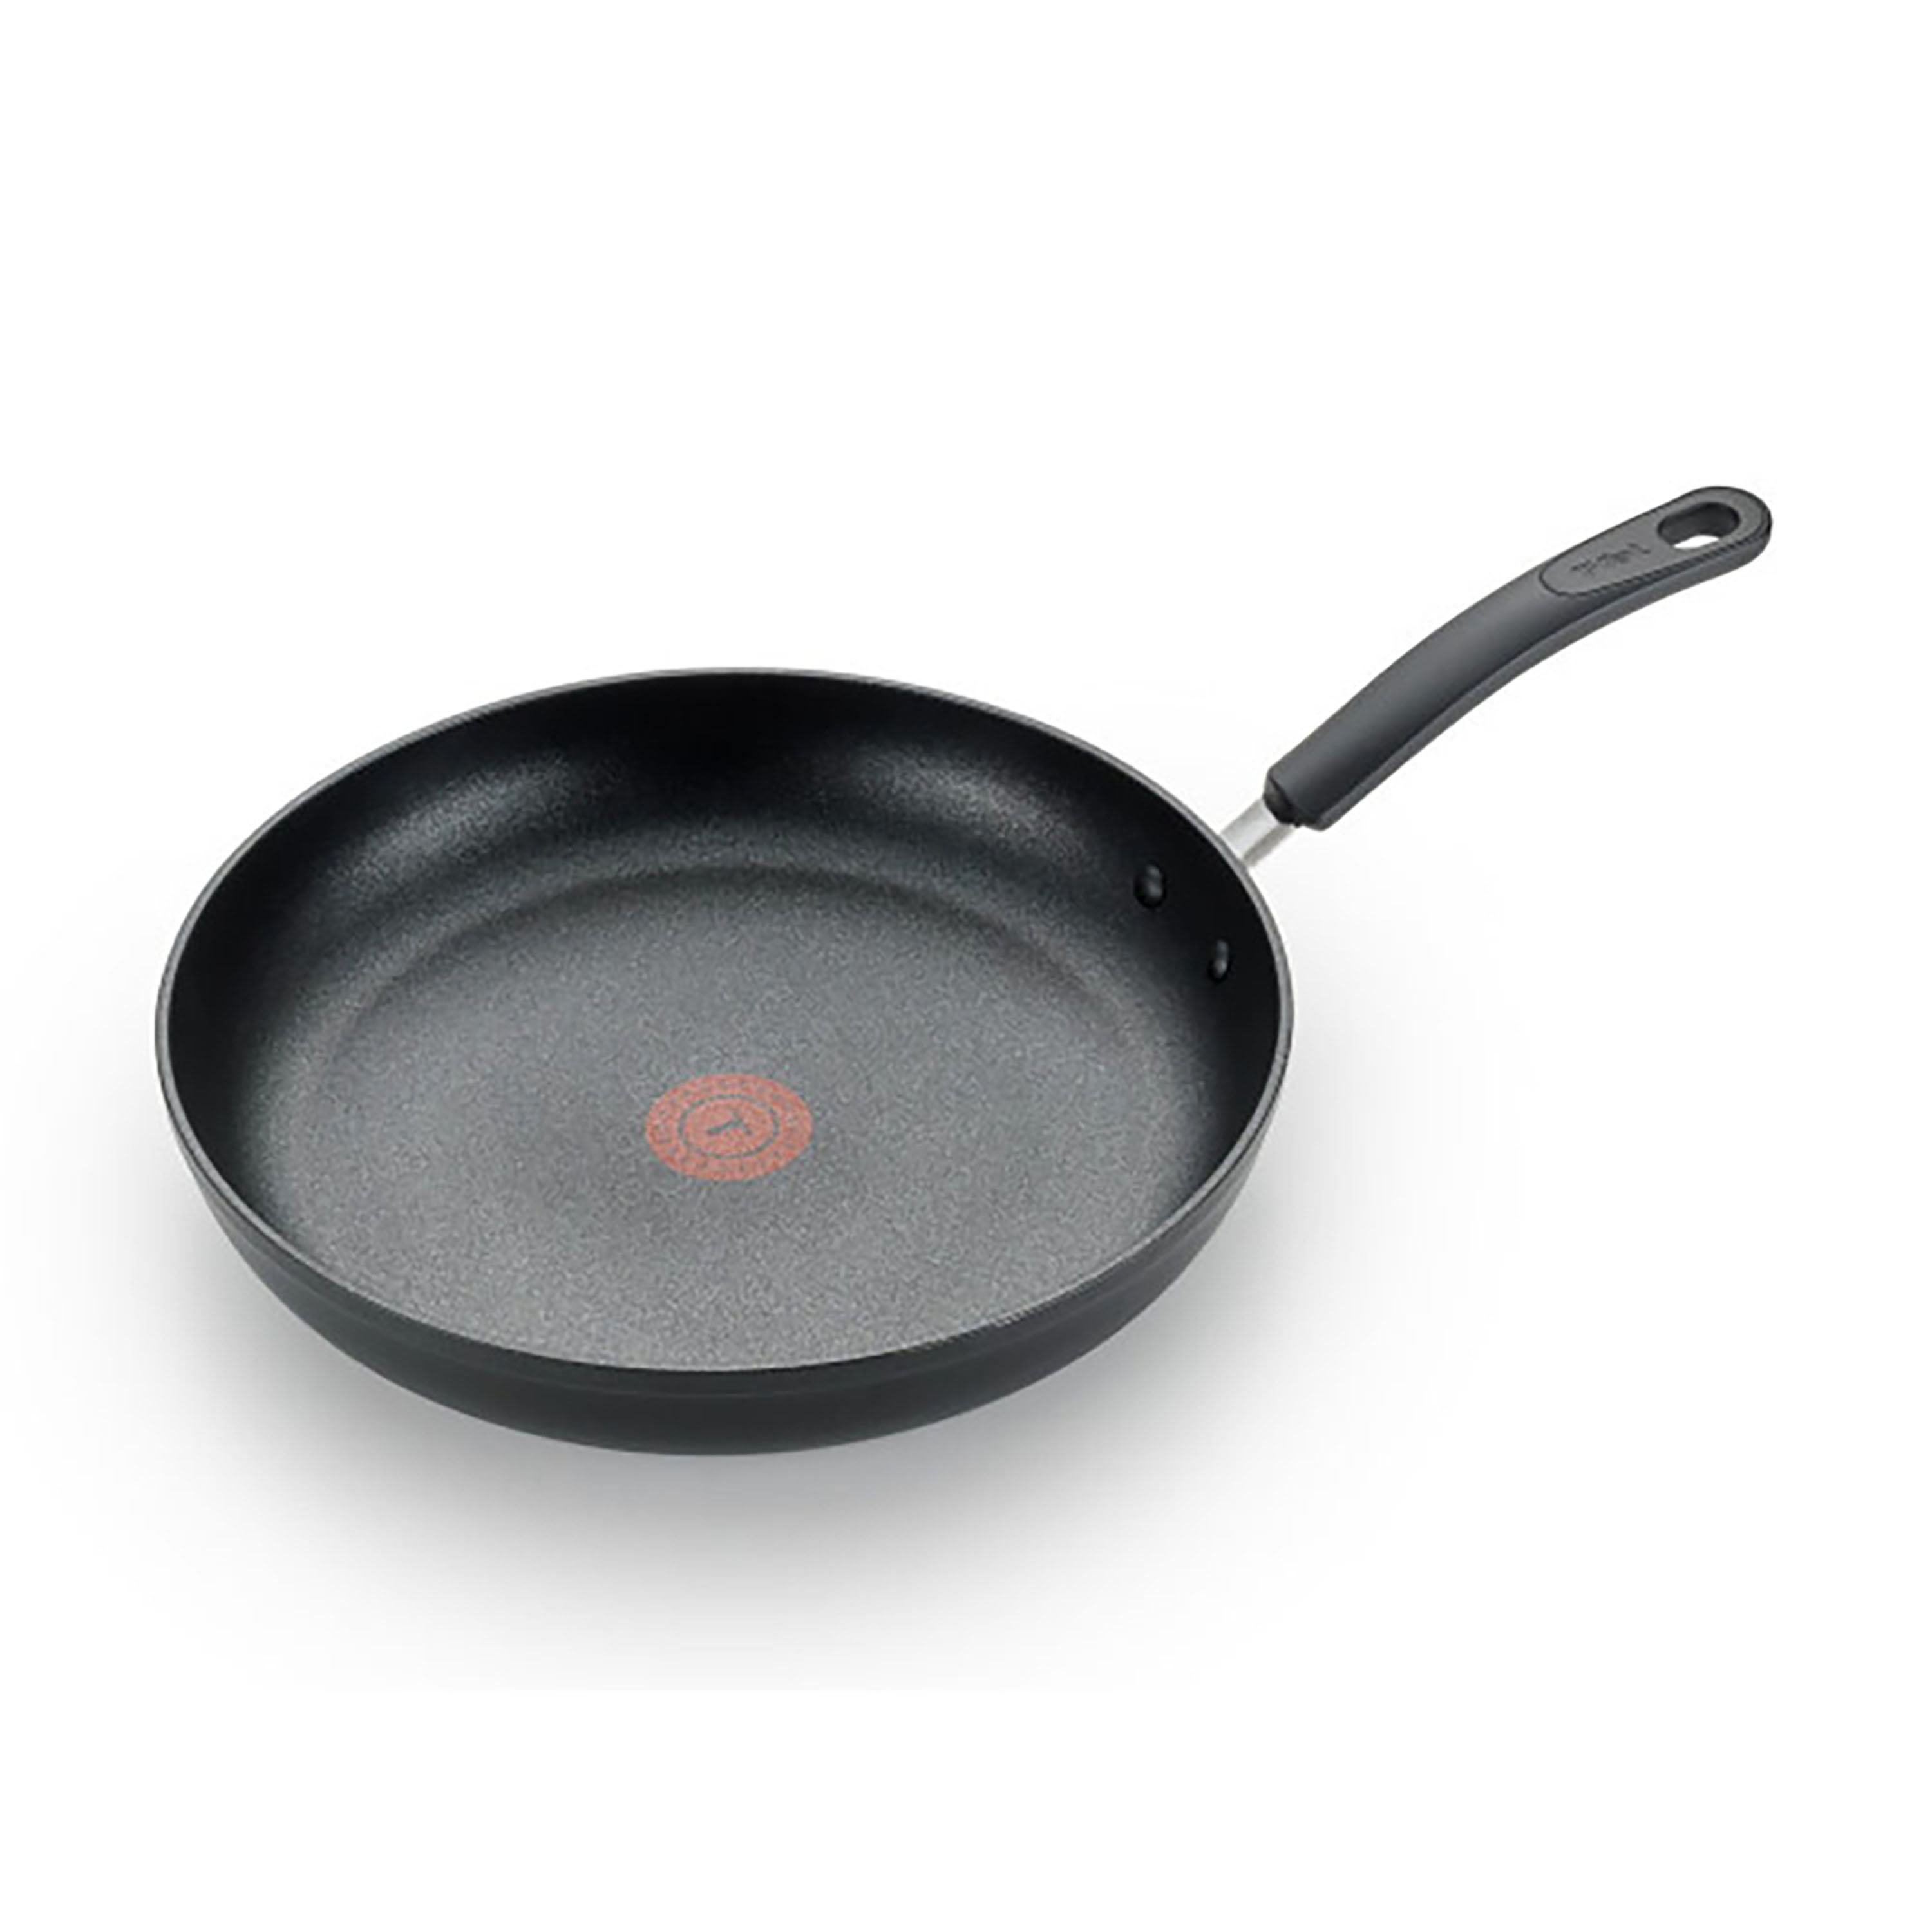 T-fal Platinum Nonstick 12-inch Fry Pan, Endurance Collection